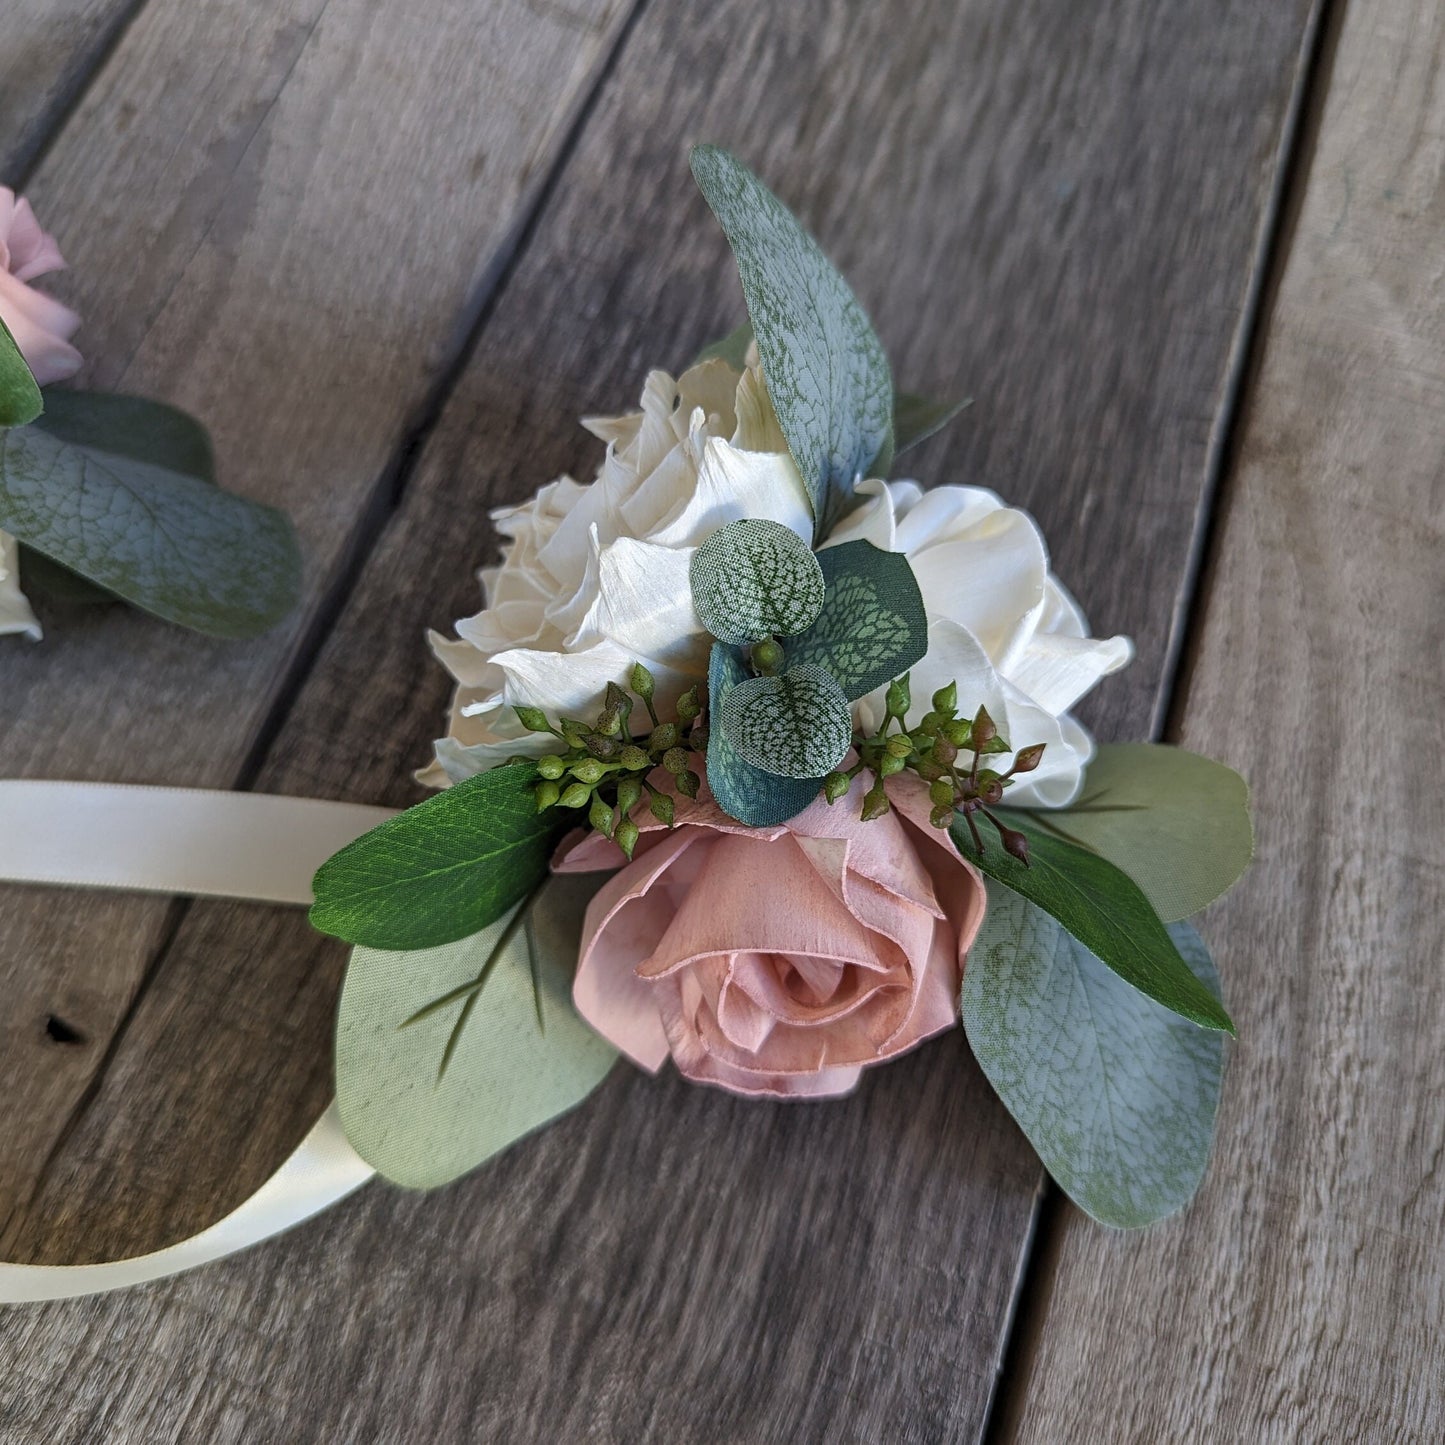 Wedding Wrist Corsage with Wood Flowers, Eucalyptus Wristlet, Wedding Corsage for Bridesmaids, Wooden Flowers Pinned Corsage